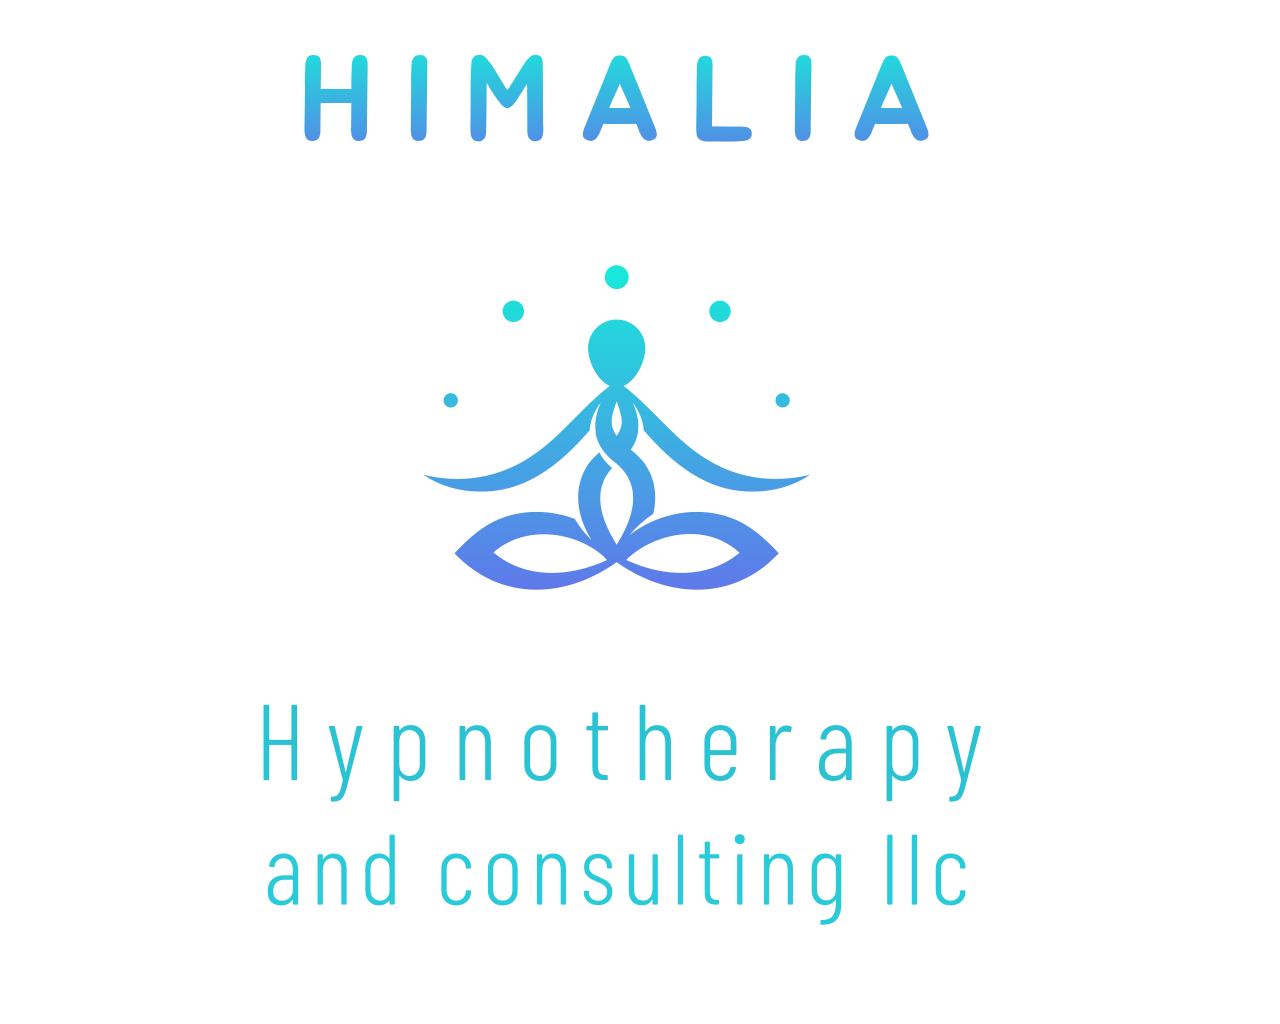 Himalia hypnotherapy and consulting LLC